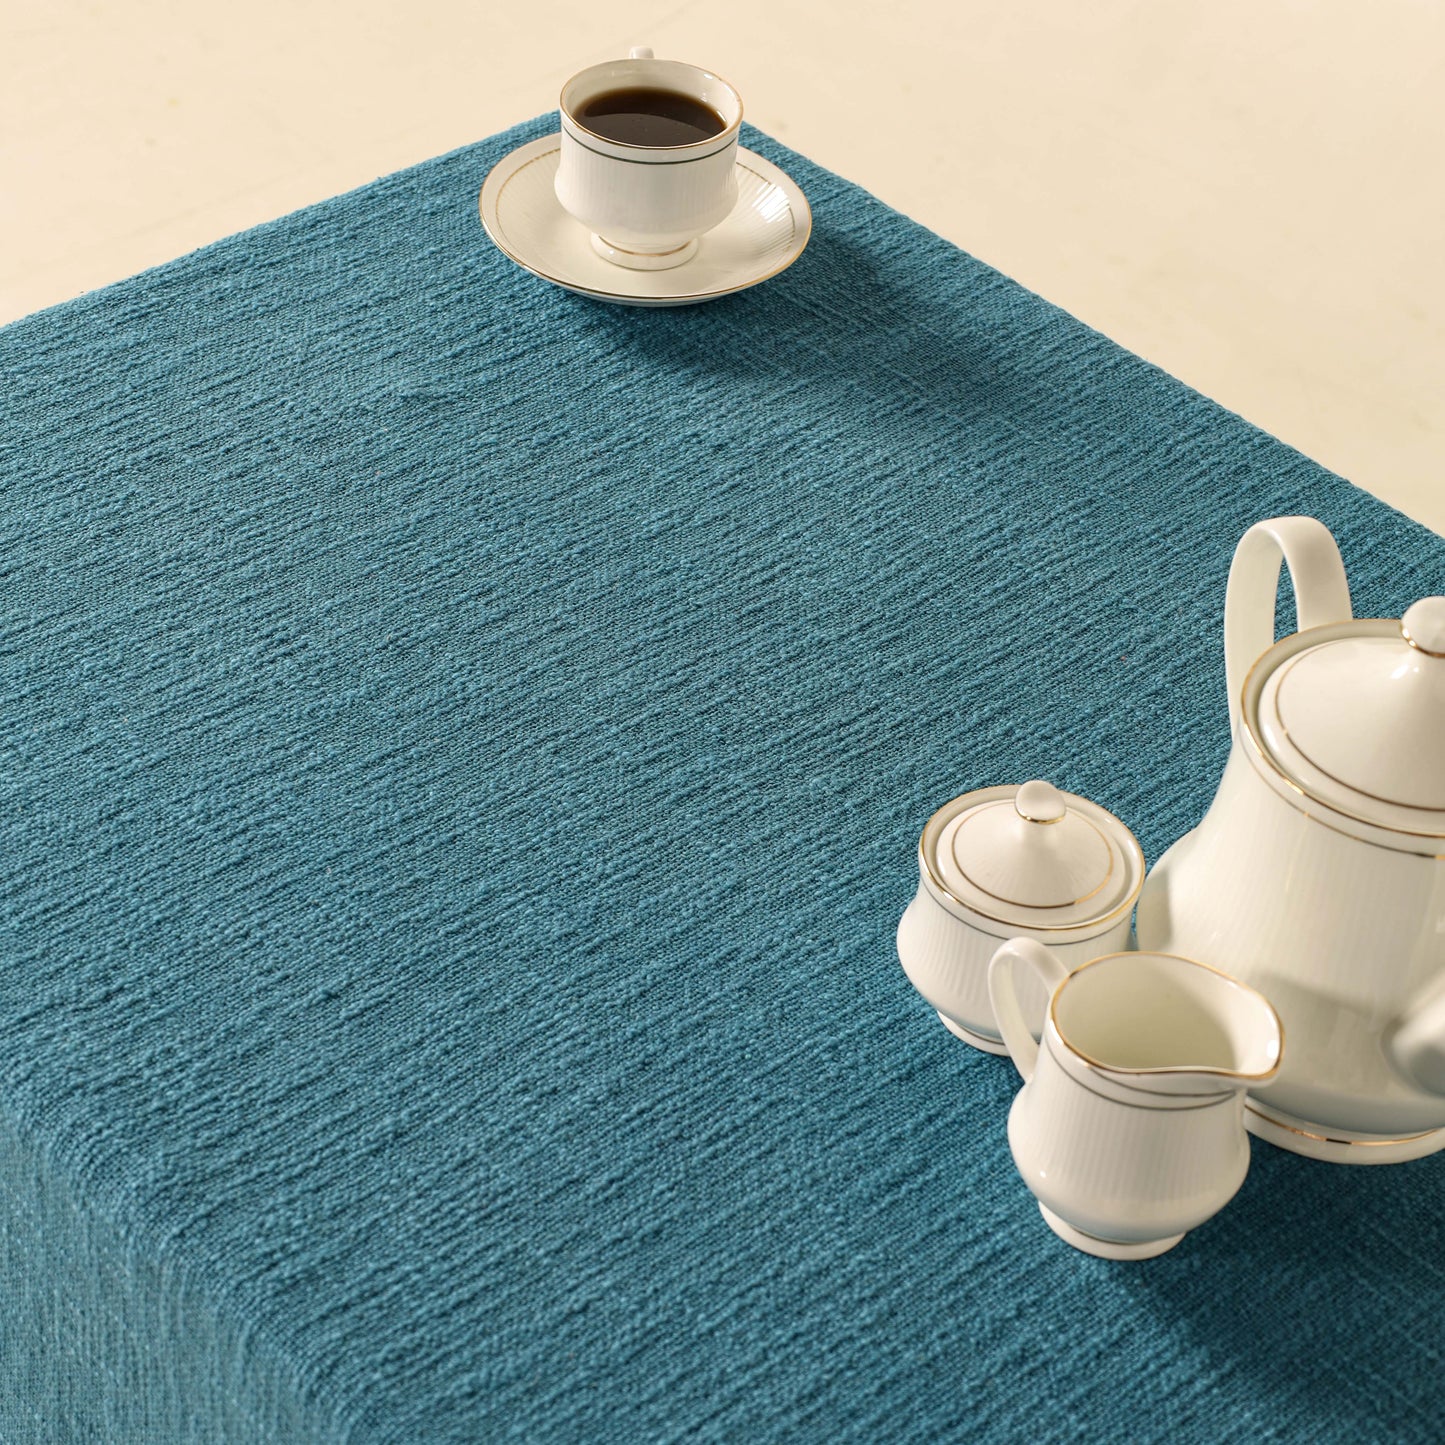 Teal Cotton Tablecloth